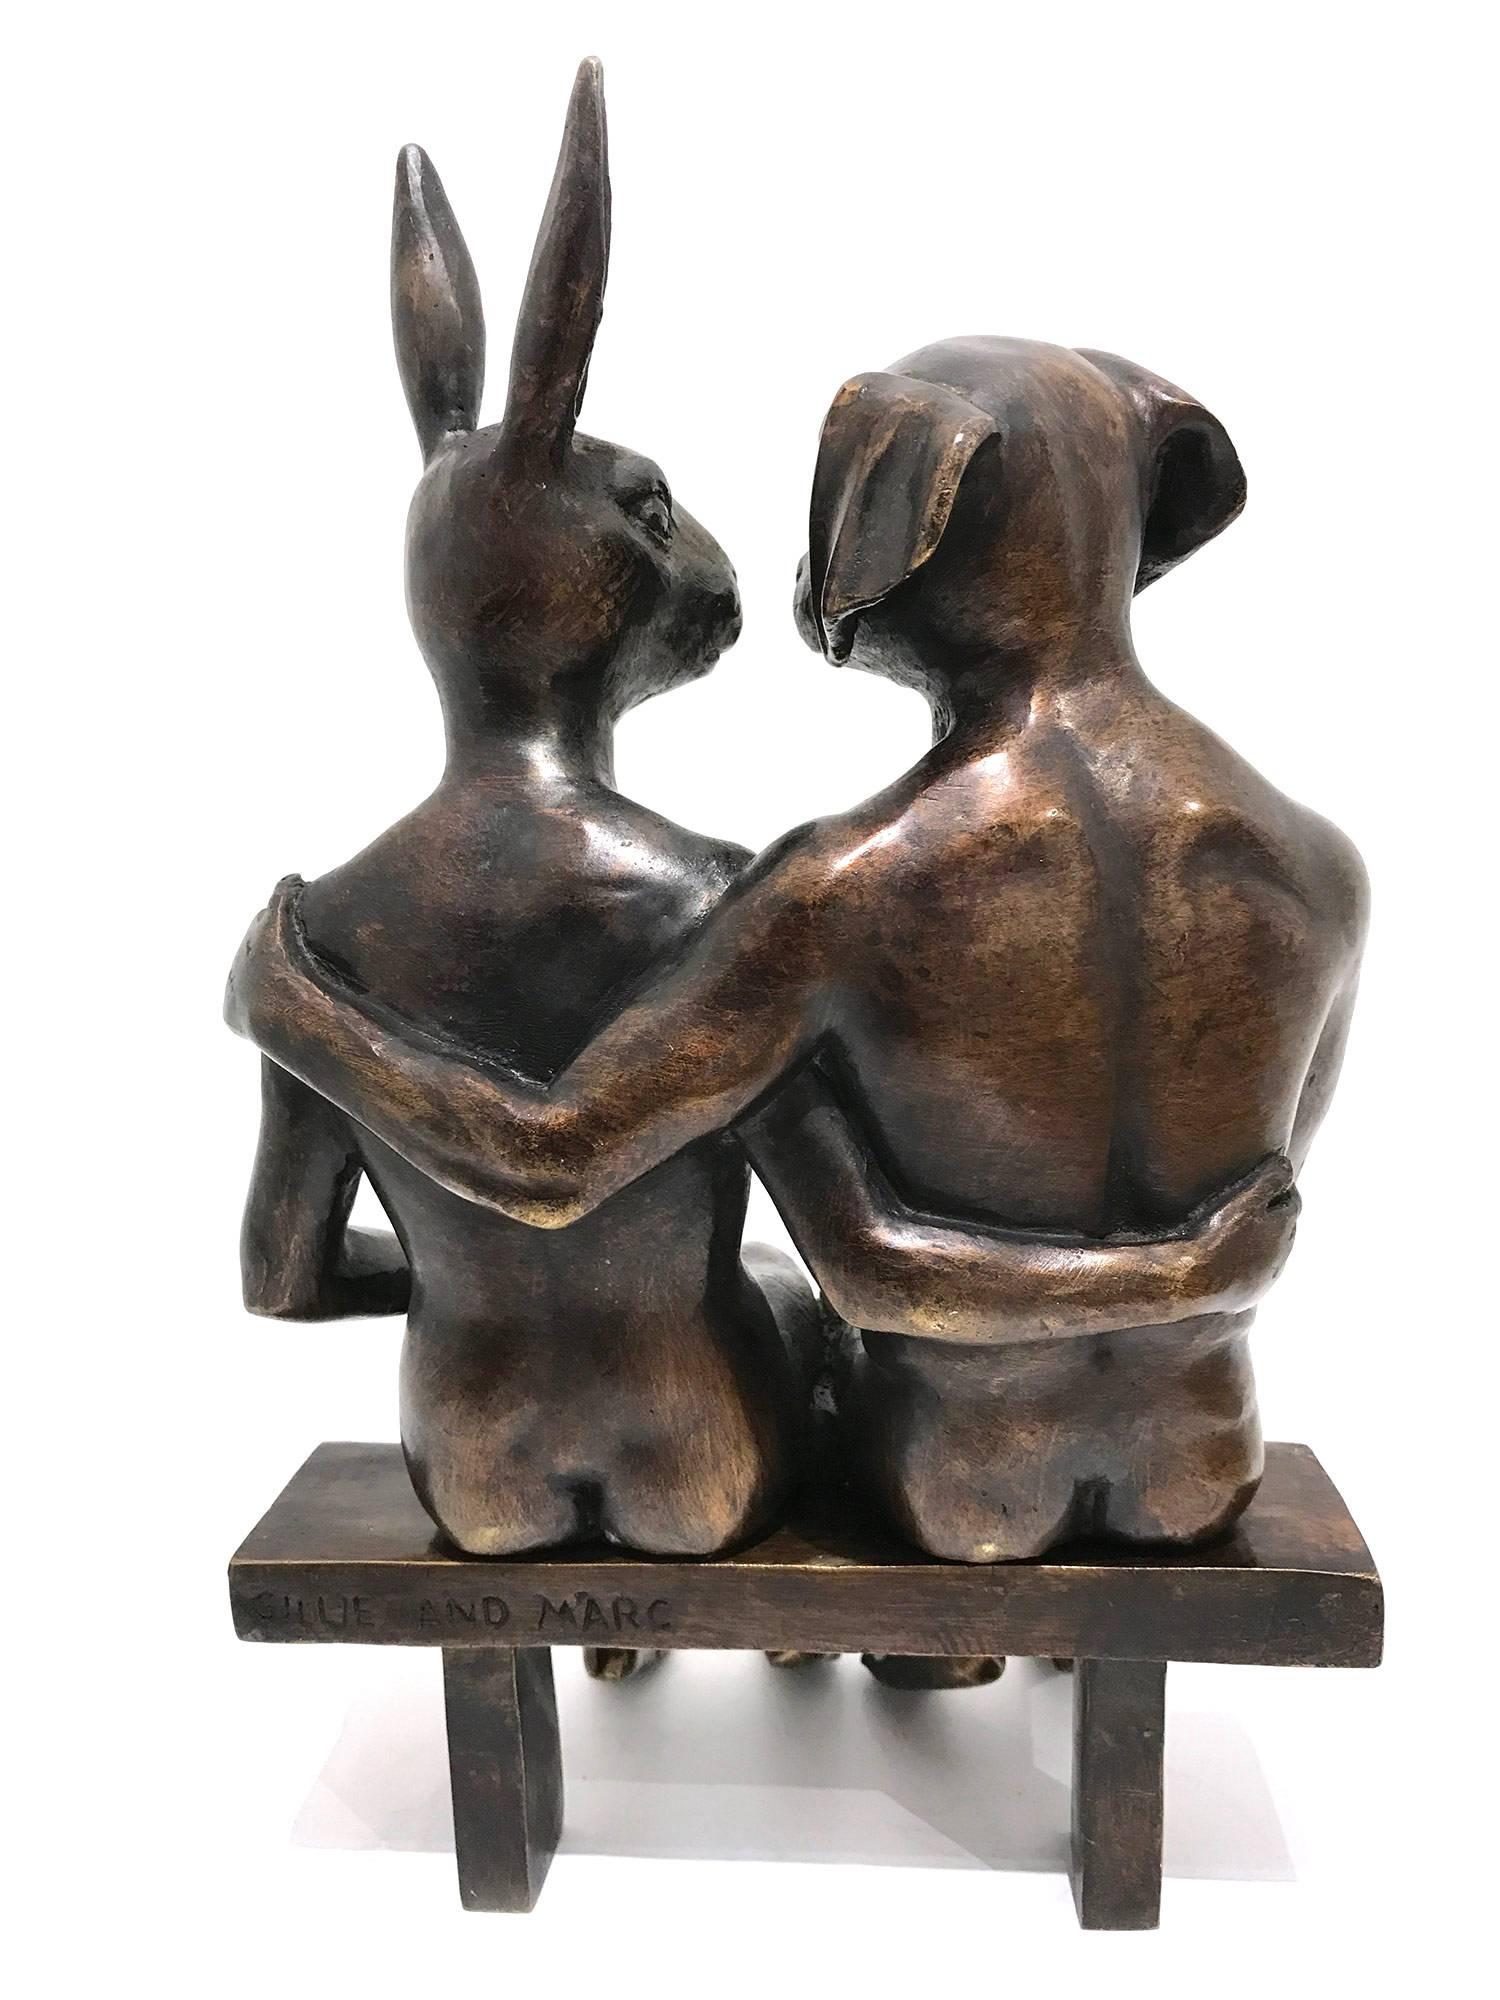 A whimsical yet very strong piece depicting the Rabbit and Weim from Gillie and Marc's iconic figures of the Dog/Bunny Human Hybrid, which has picked up much esteem across the globe. Here we find these characters seated on a bench with arms around